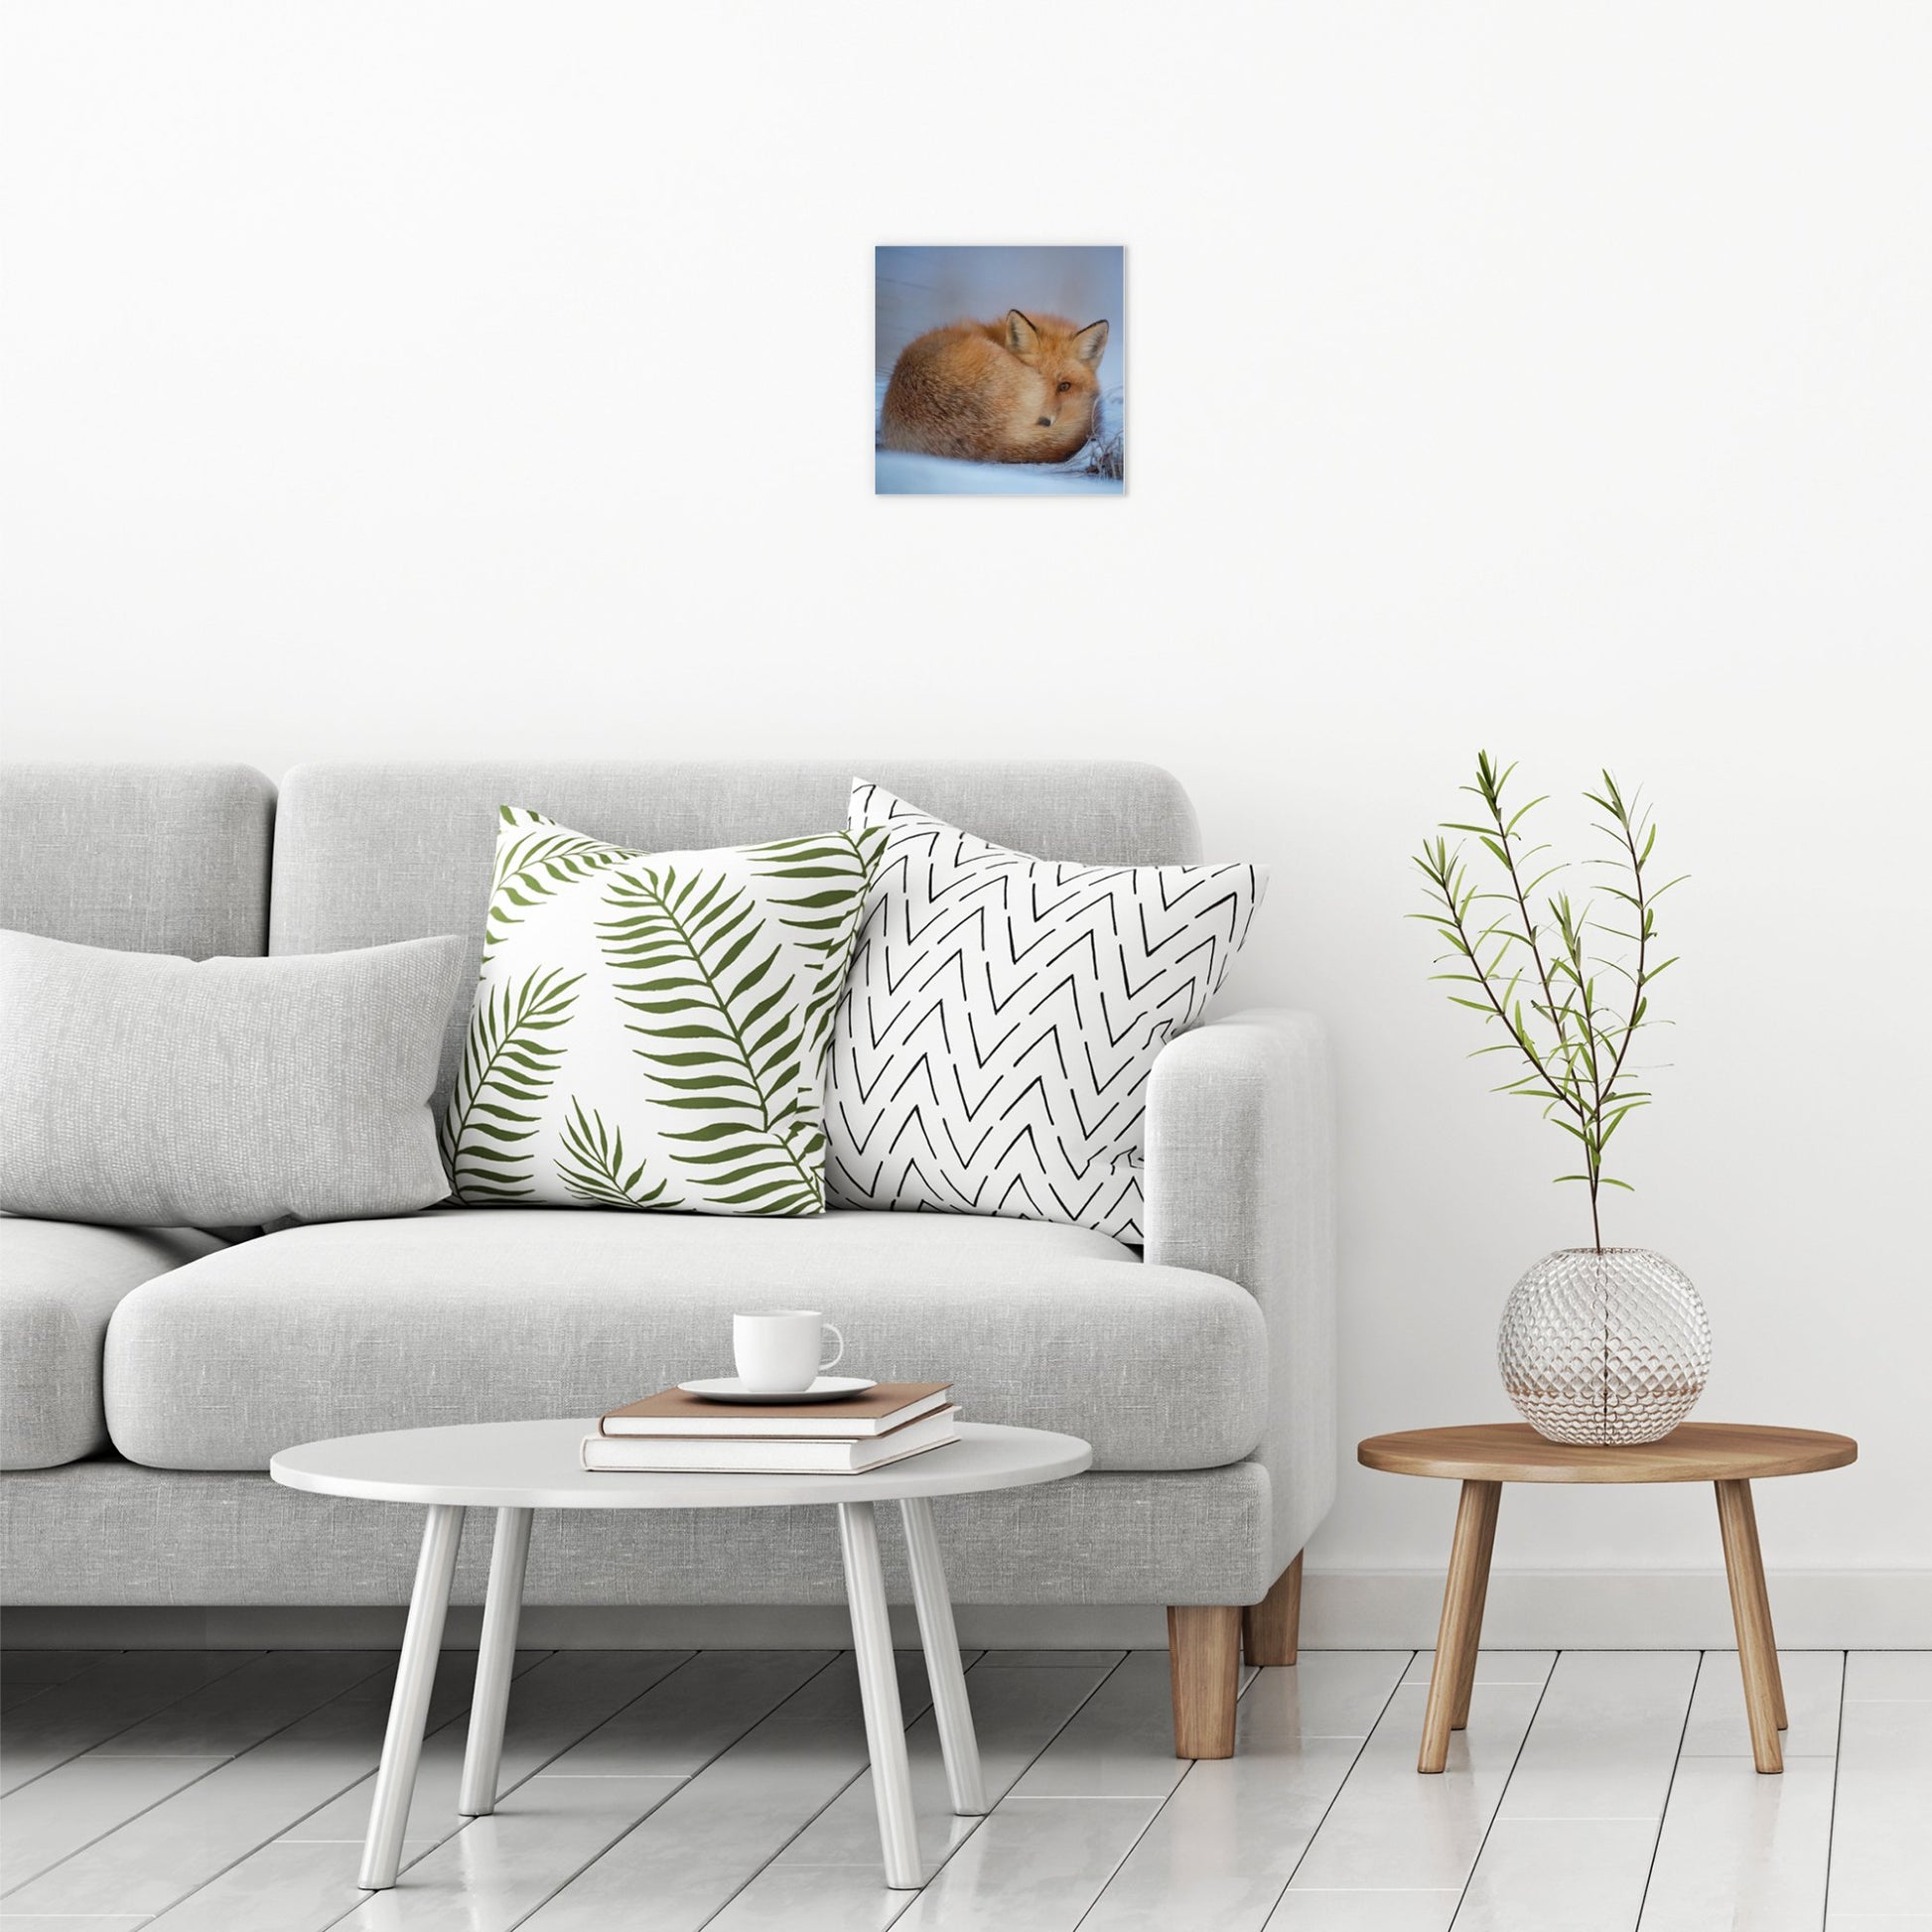 A contemporary modern room view showing a small size metal art poster display plate with printed design of a A Cute Fox in the Snow